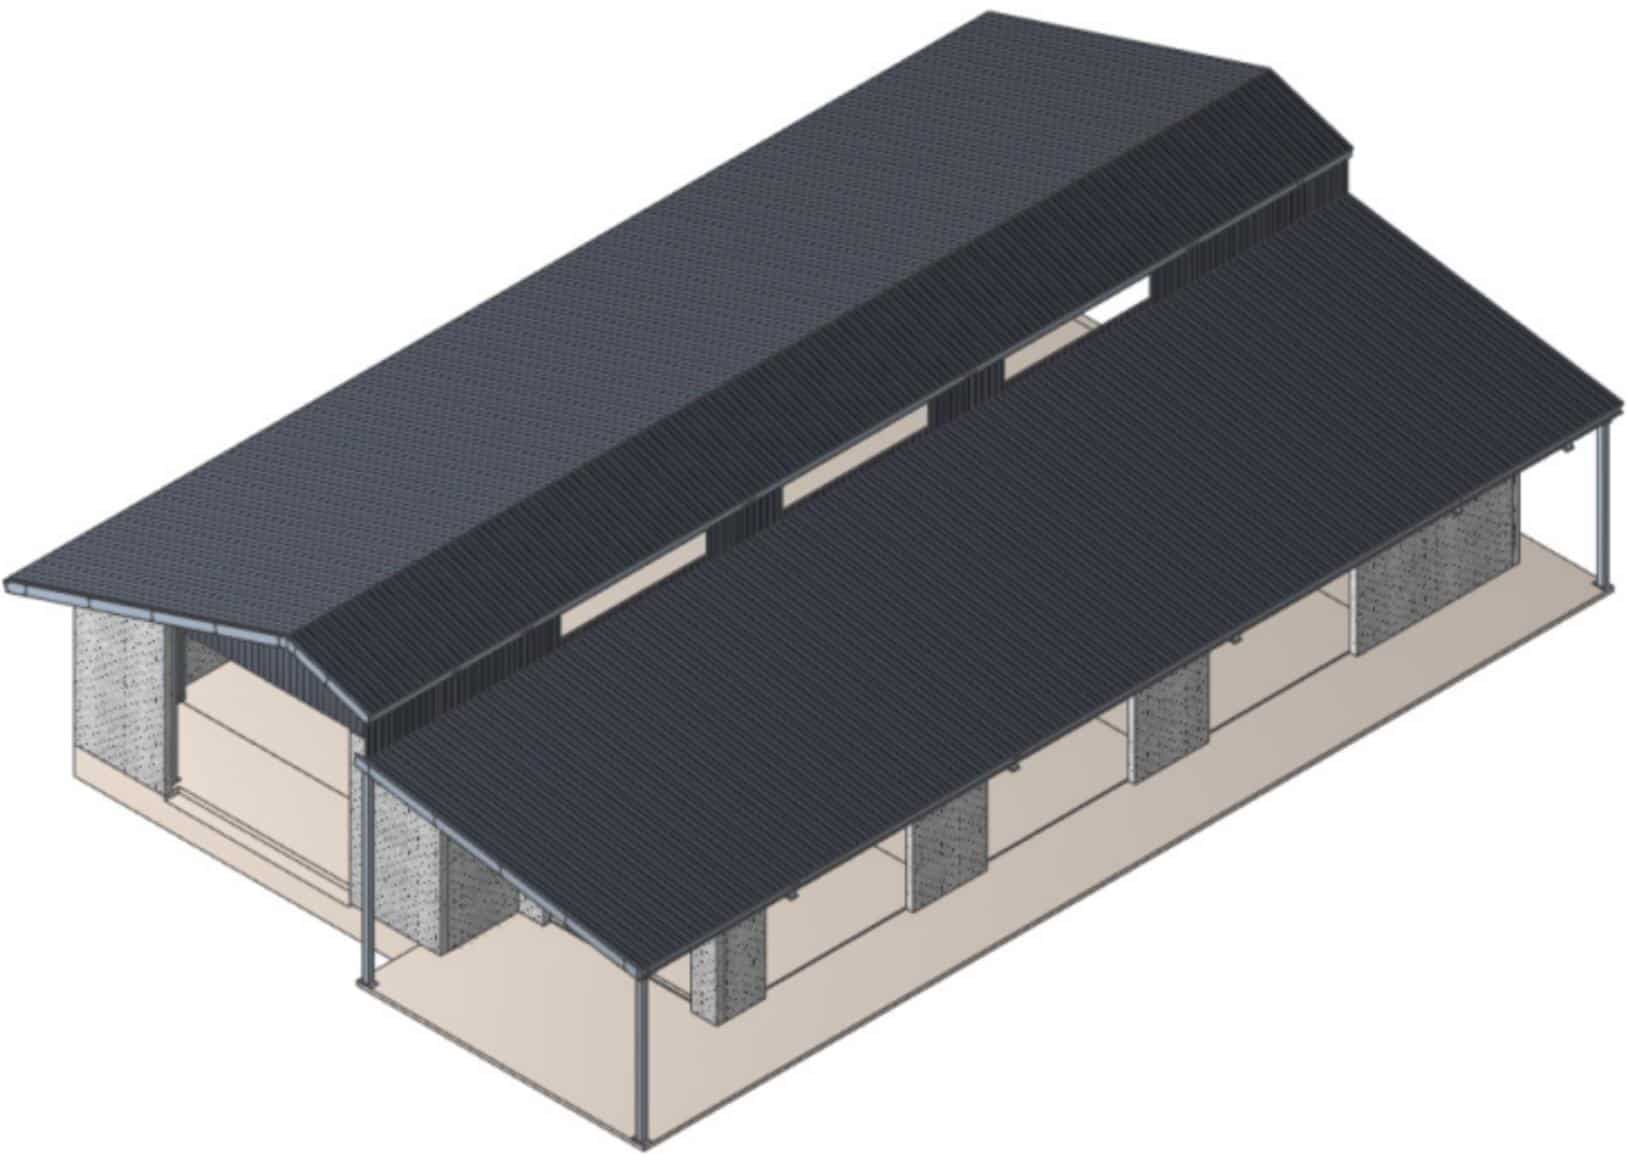 A 3D Render of a one off shed design